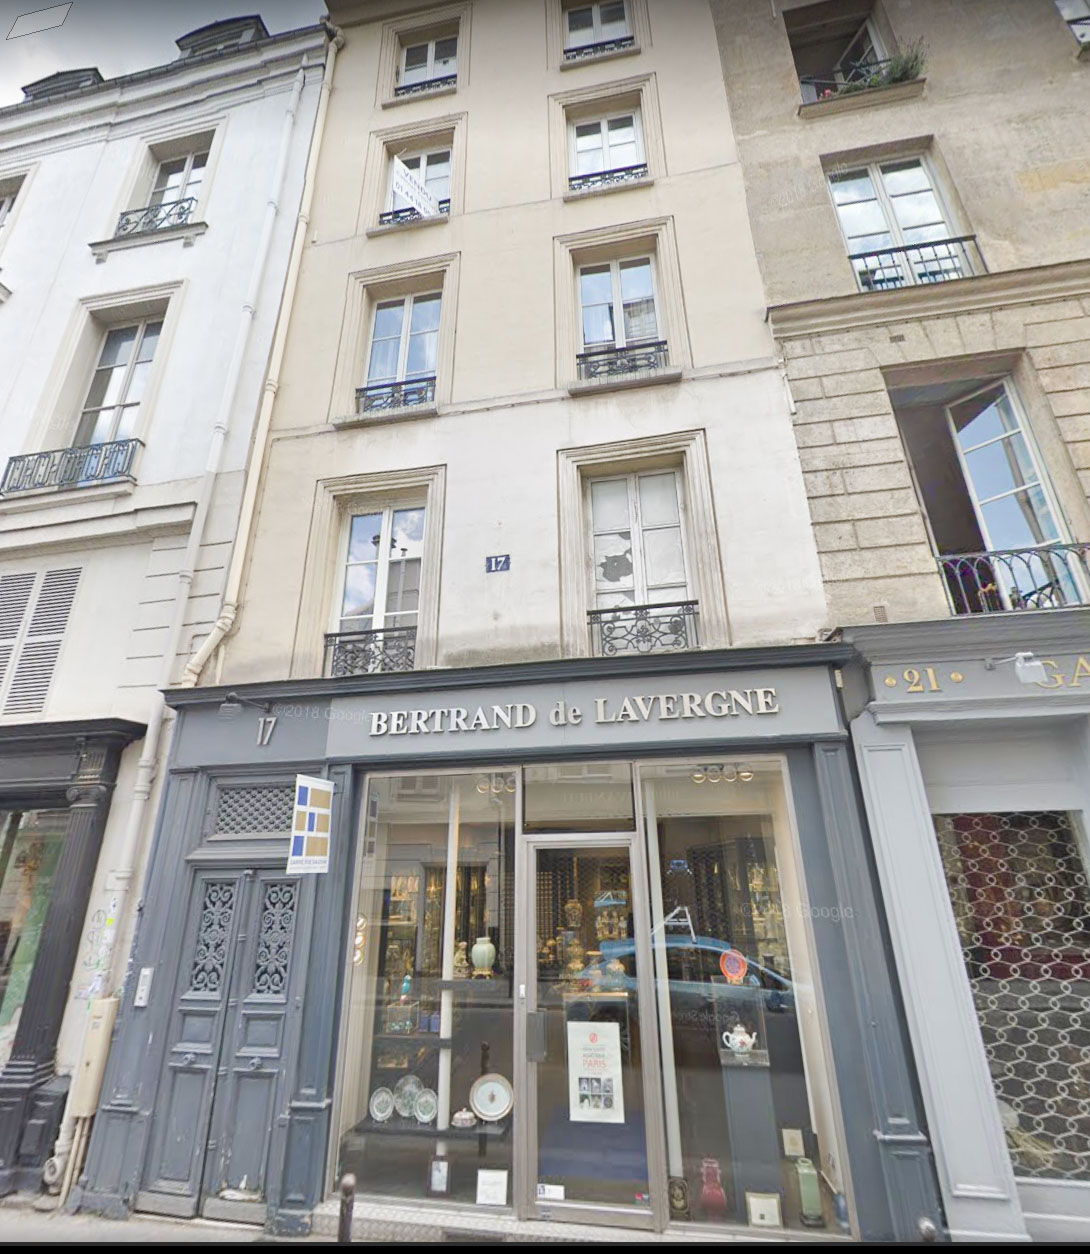 17, rue des Saints-Pères. Top floor was the secret laboratory where Adolfo and three other forgers produced fake documents for the French Resistance. Photo by anonymous (date unknown). Google Maps